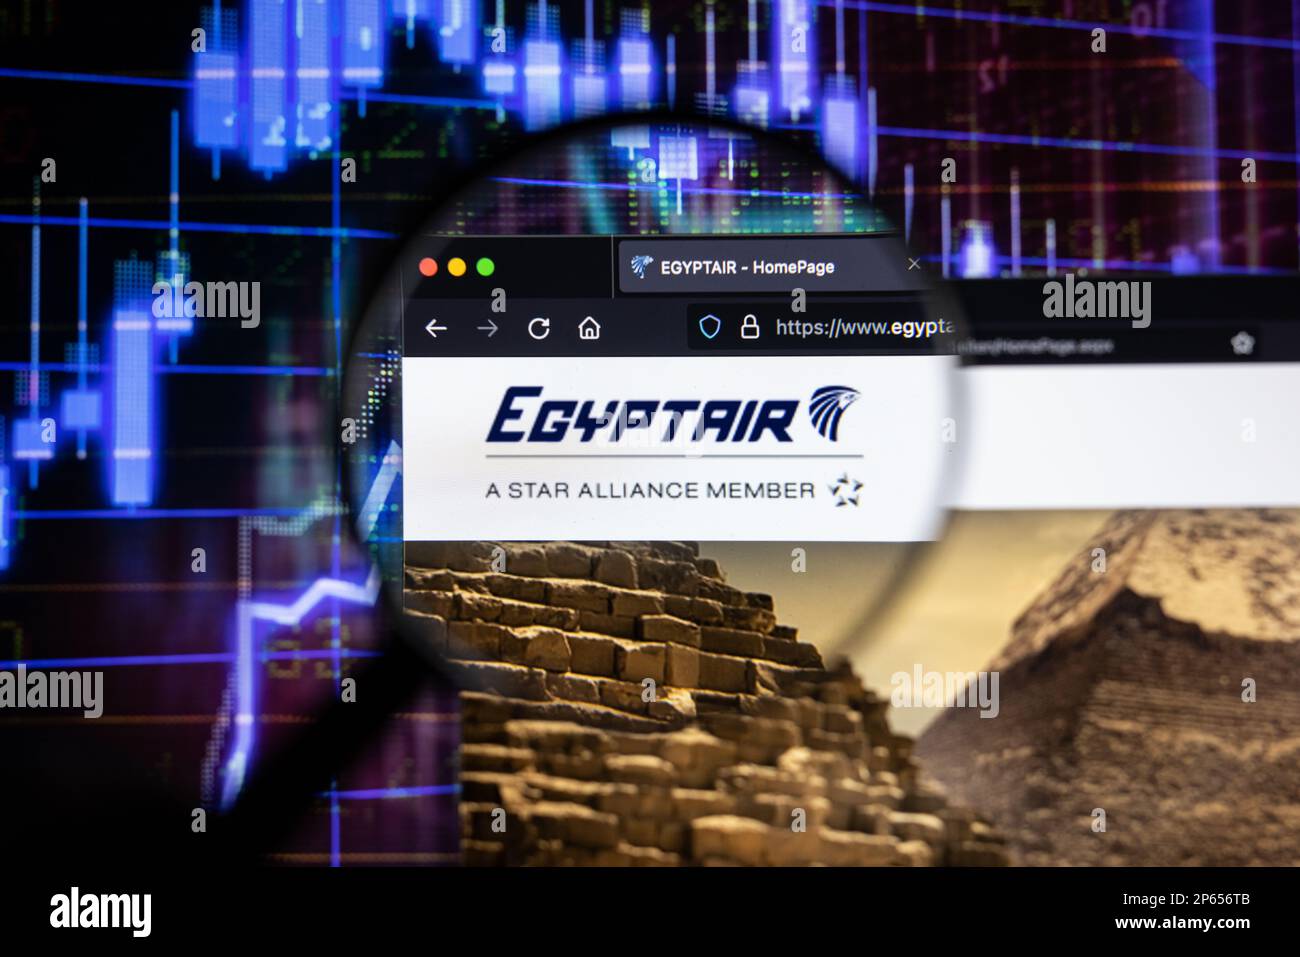 Egyptair airline company logo on a website with blurry stock market developments in the background, seen on a screen through a magnifying glass Stock Photo